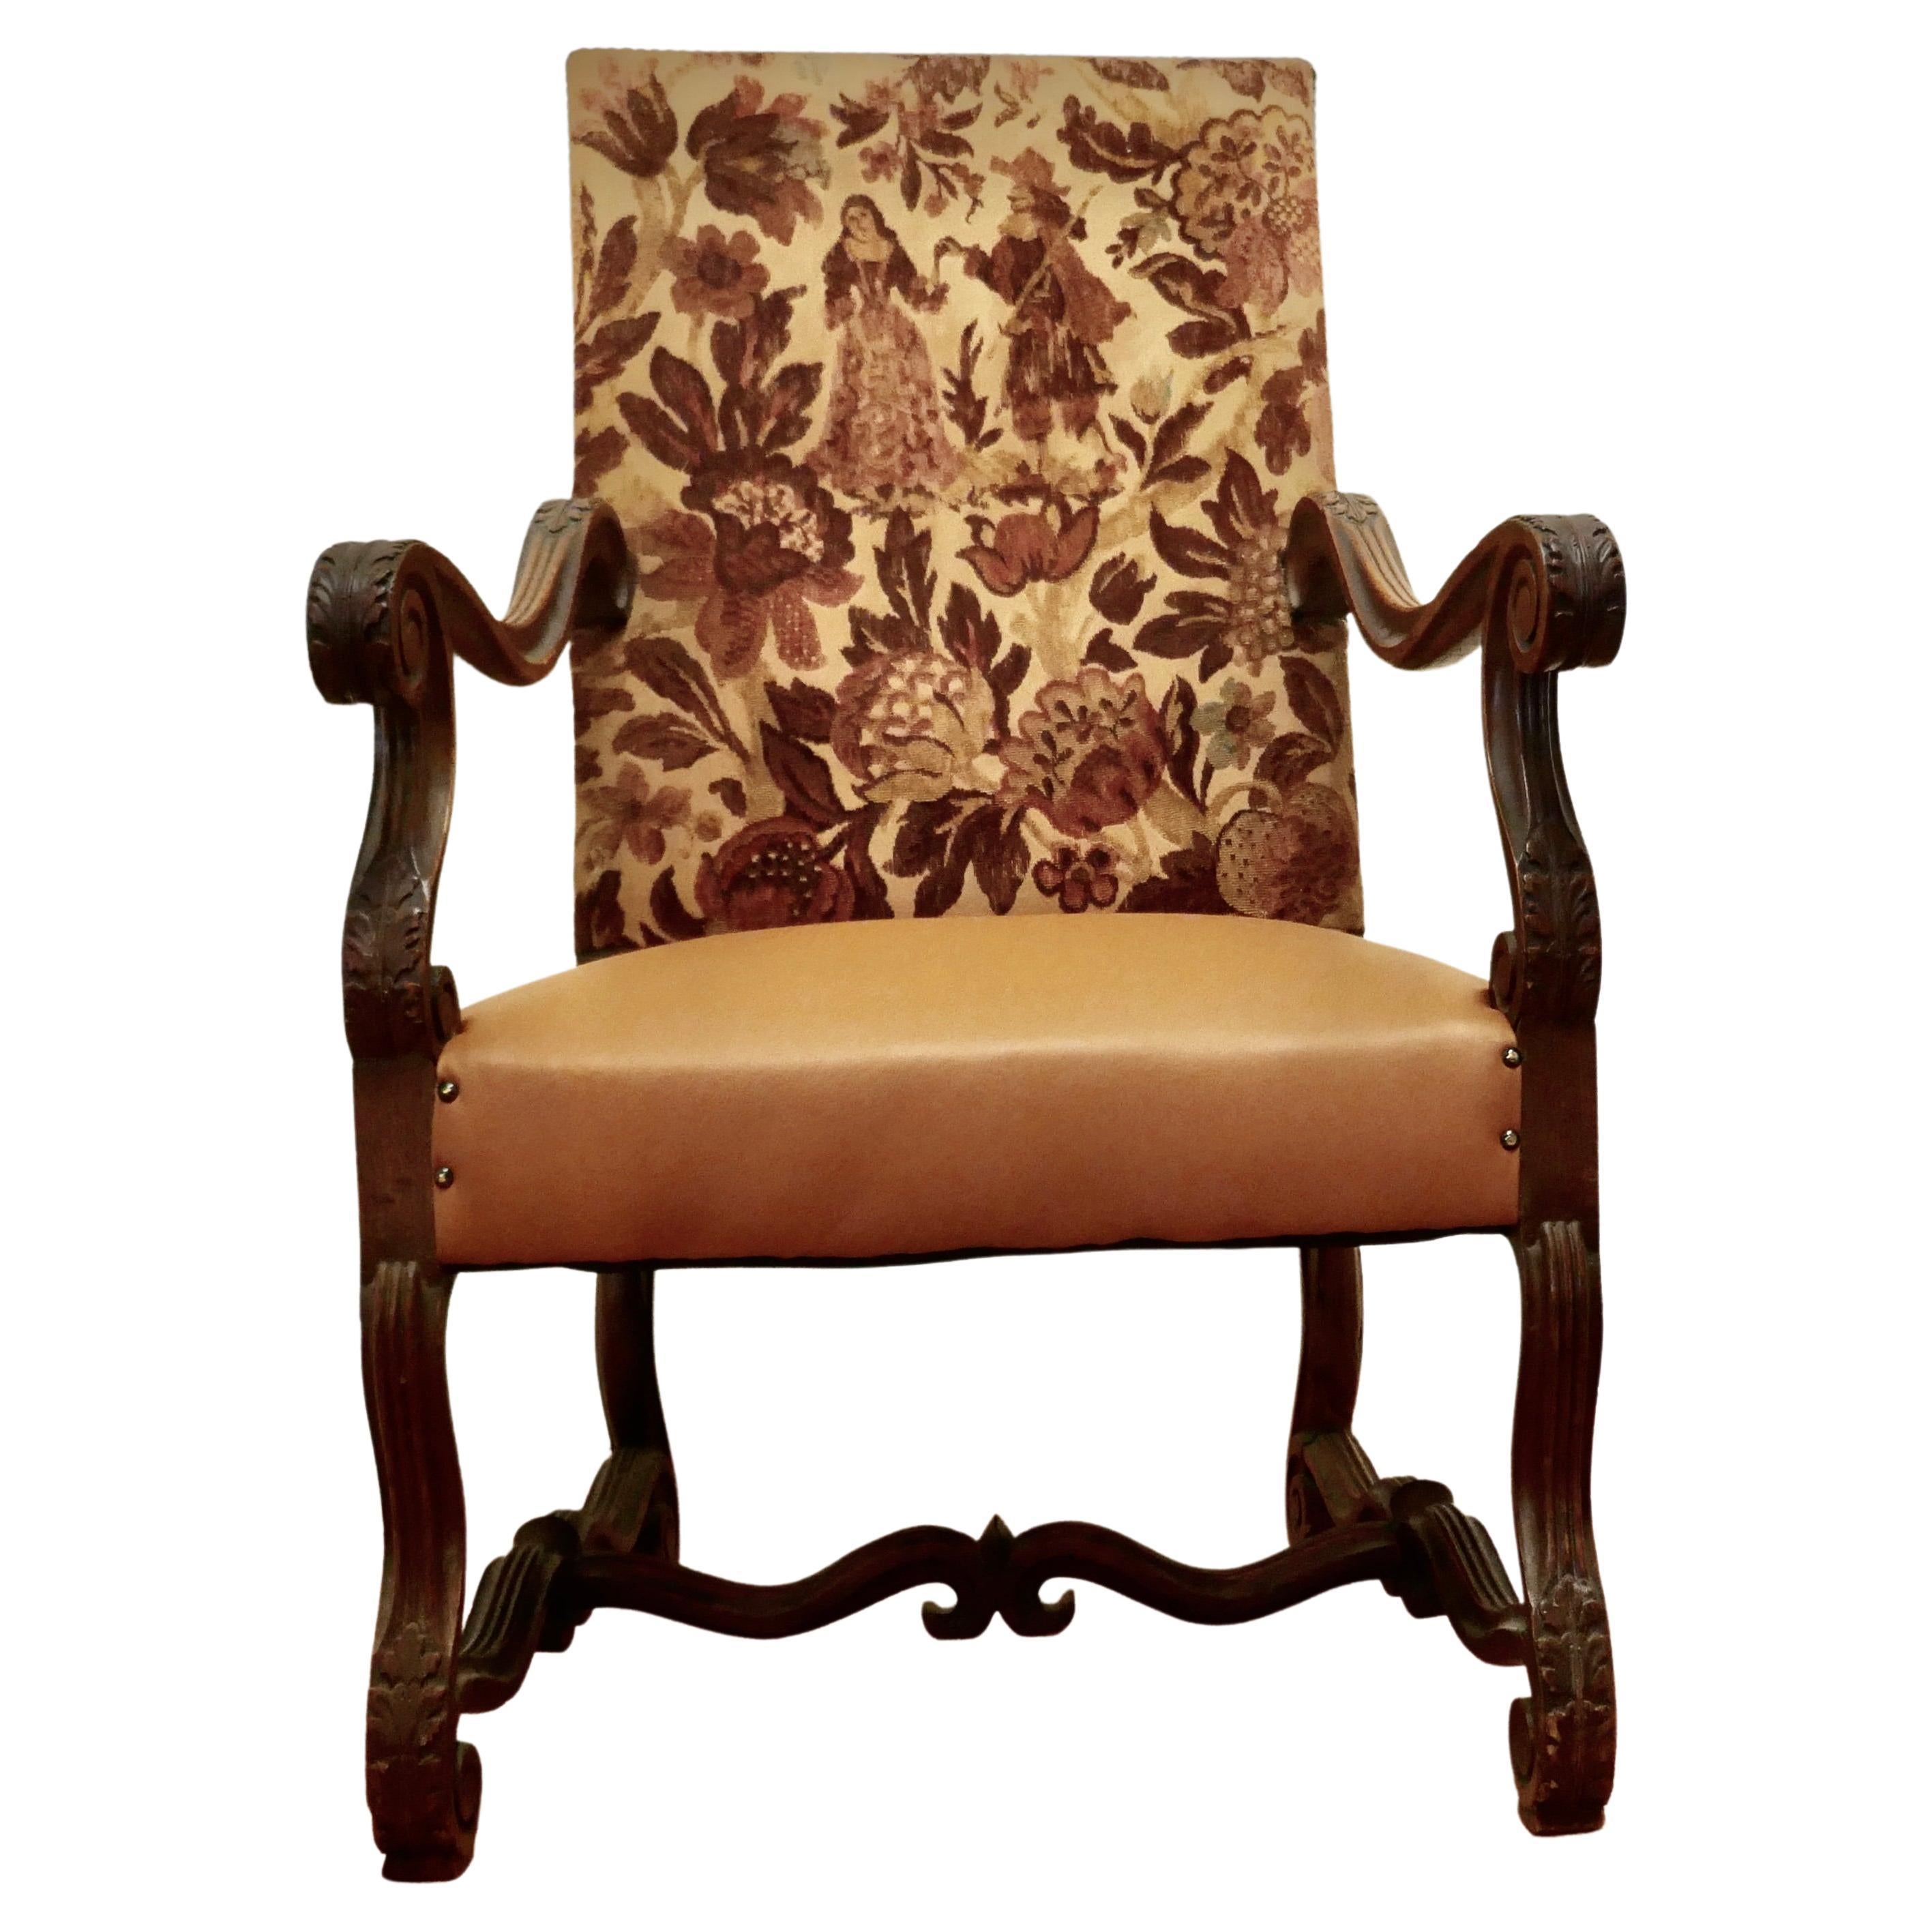 Carved French Oak Salon Throne Chair, Original Pictorial Upholstery